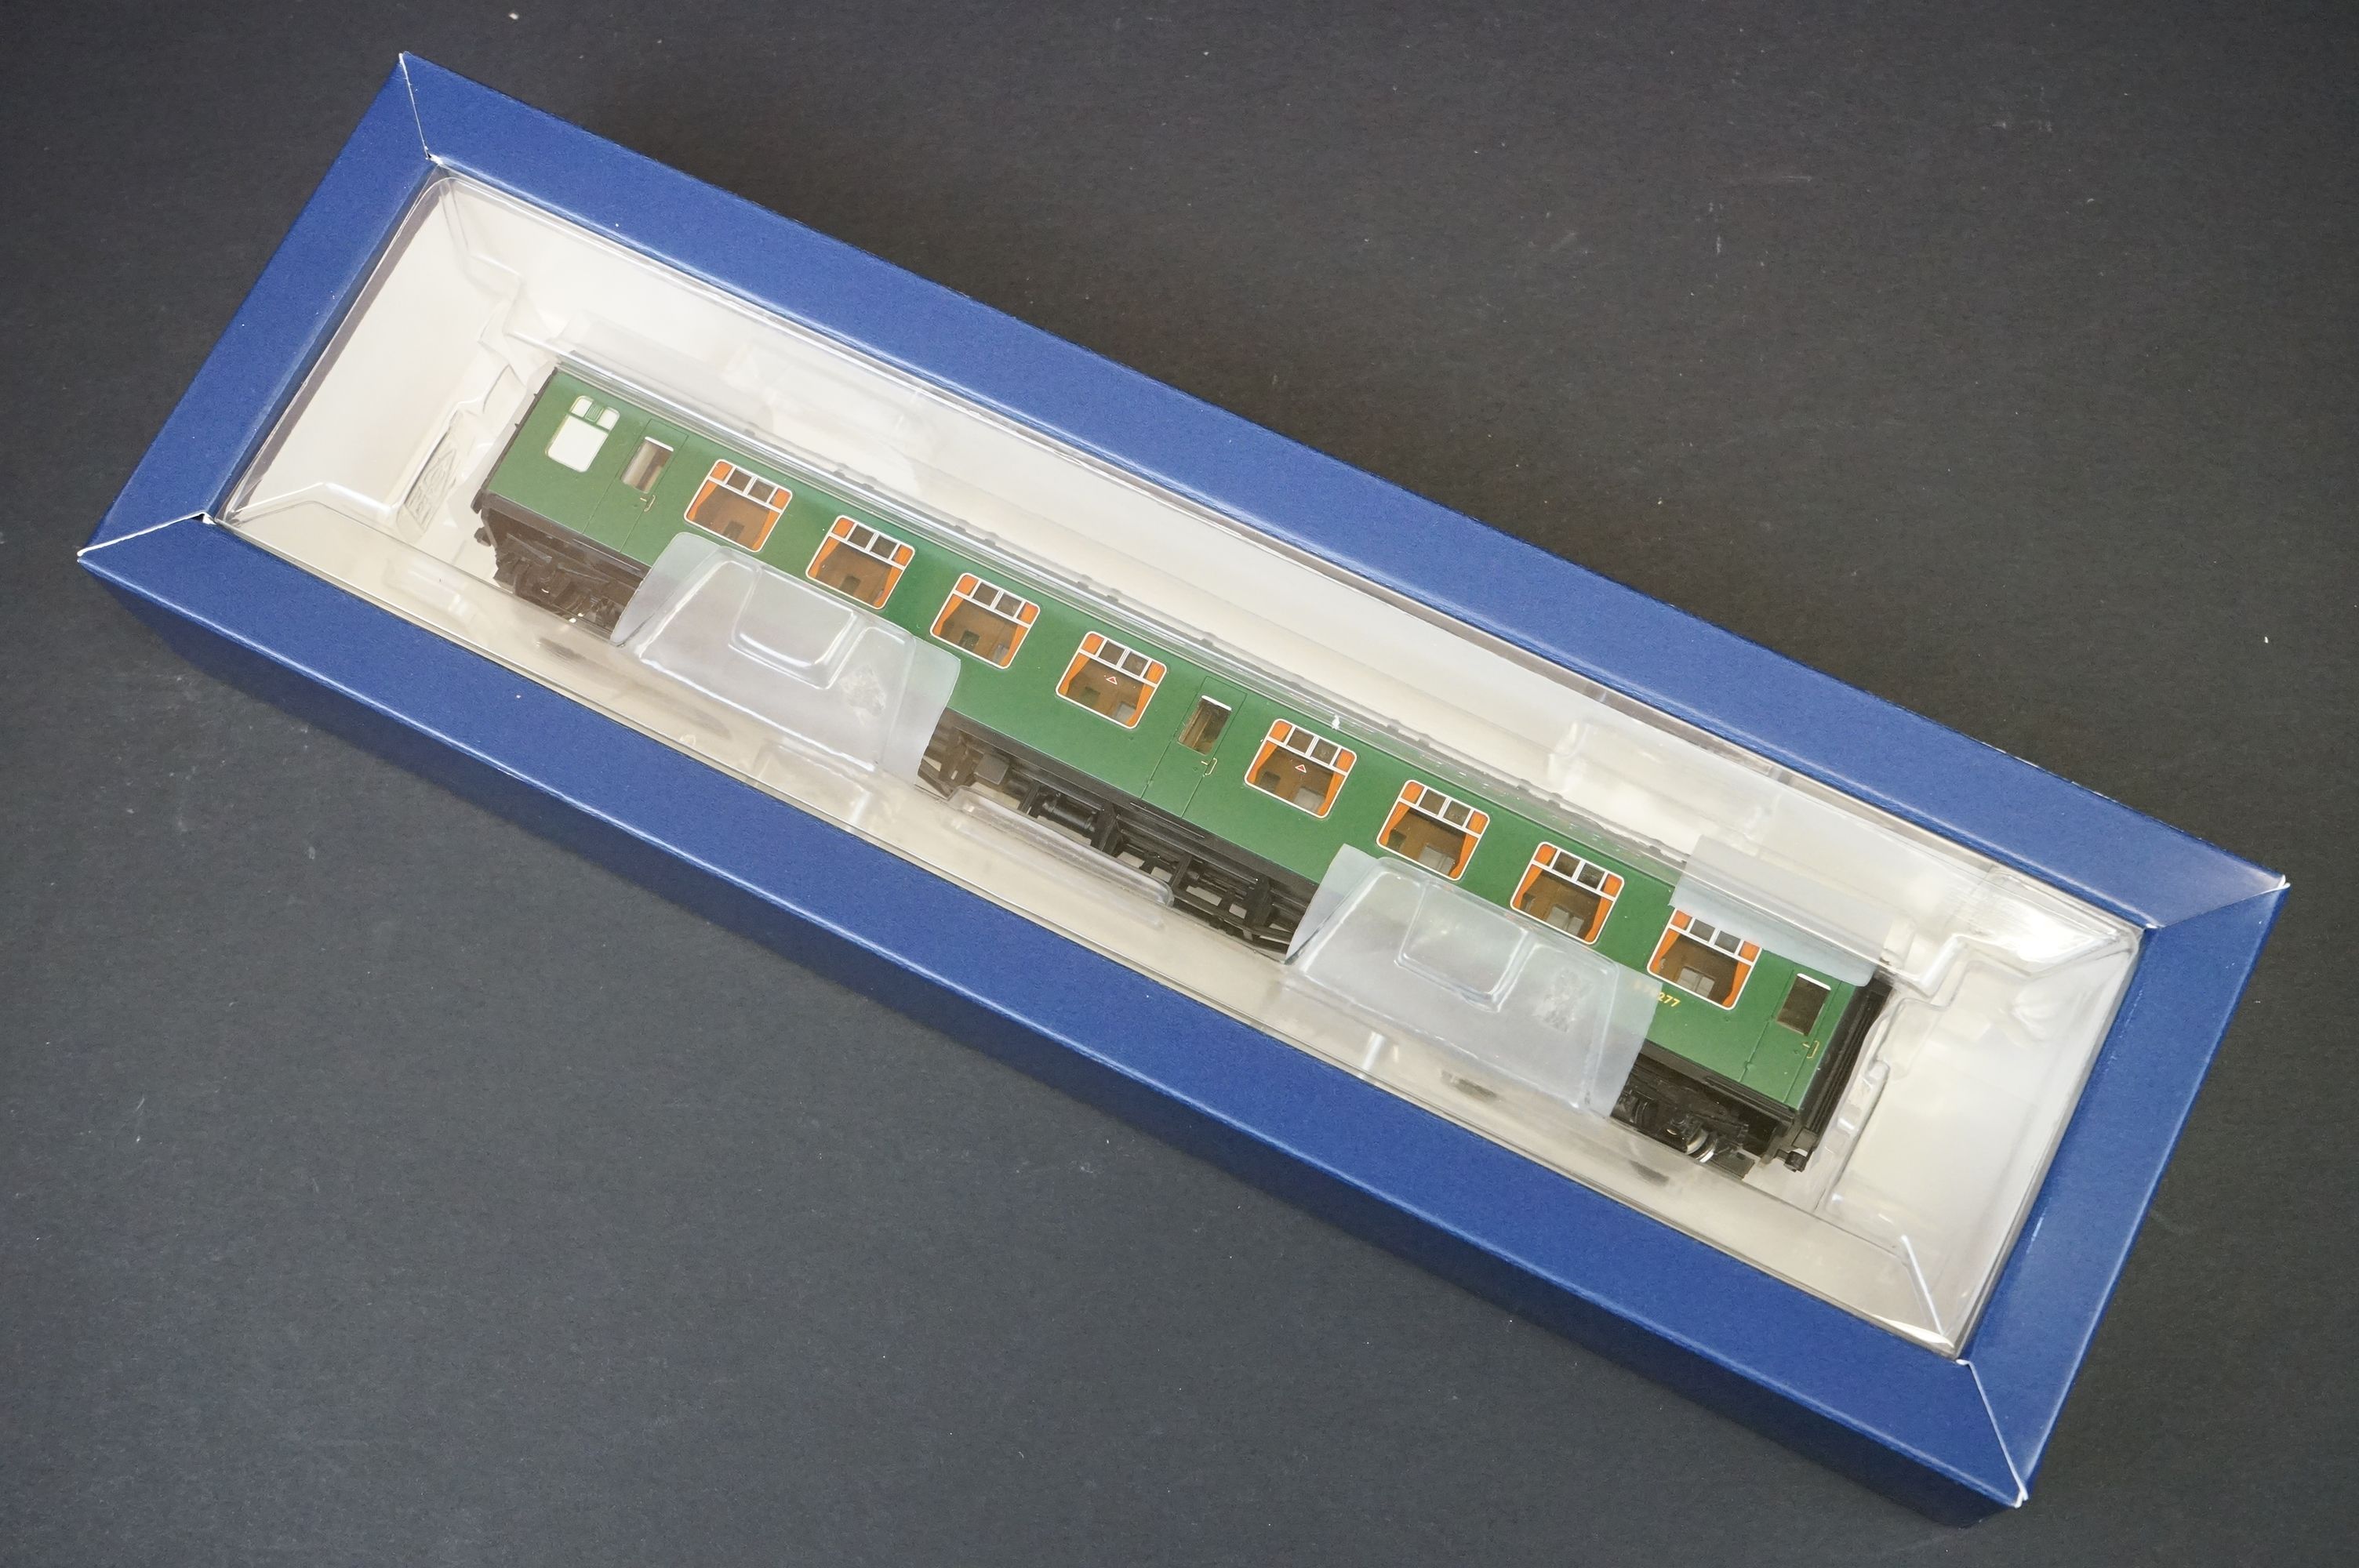 Boxed Bachmann OO gauge 31-426A Late SR Multiple Unit Green with yellow warning panels 4 Car EMU Set - Image 5 of 8